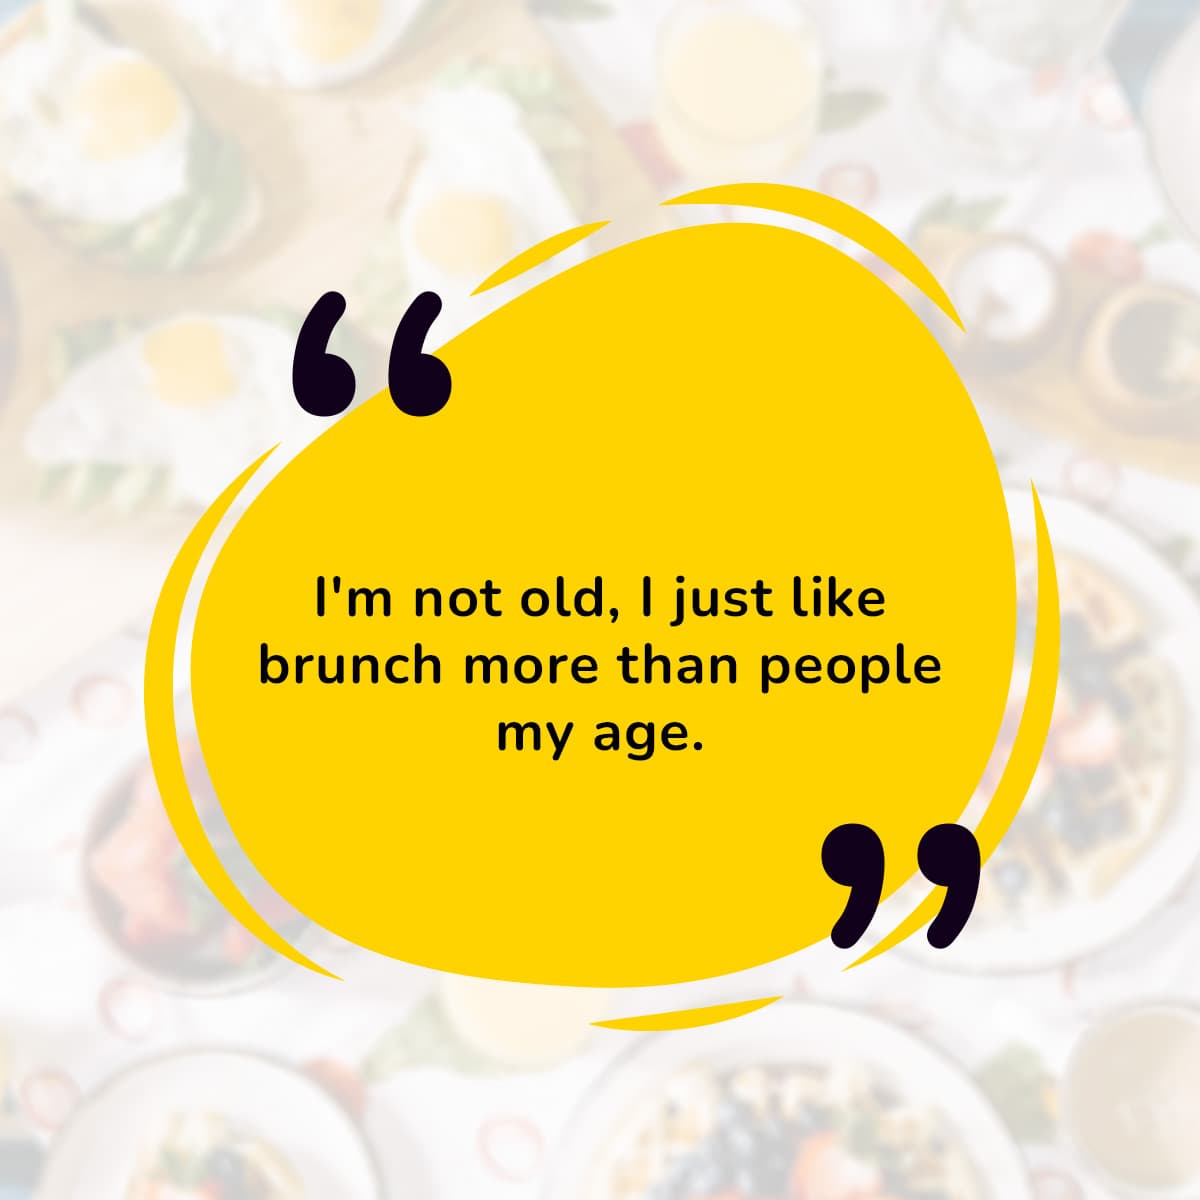 I'm not old, I just like brunch more than people my age.